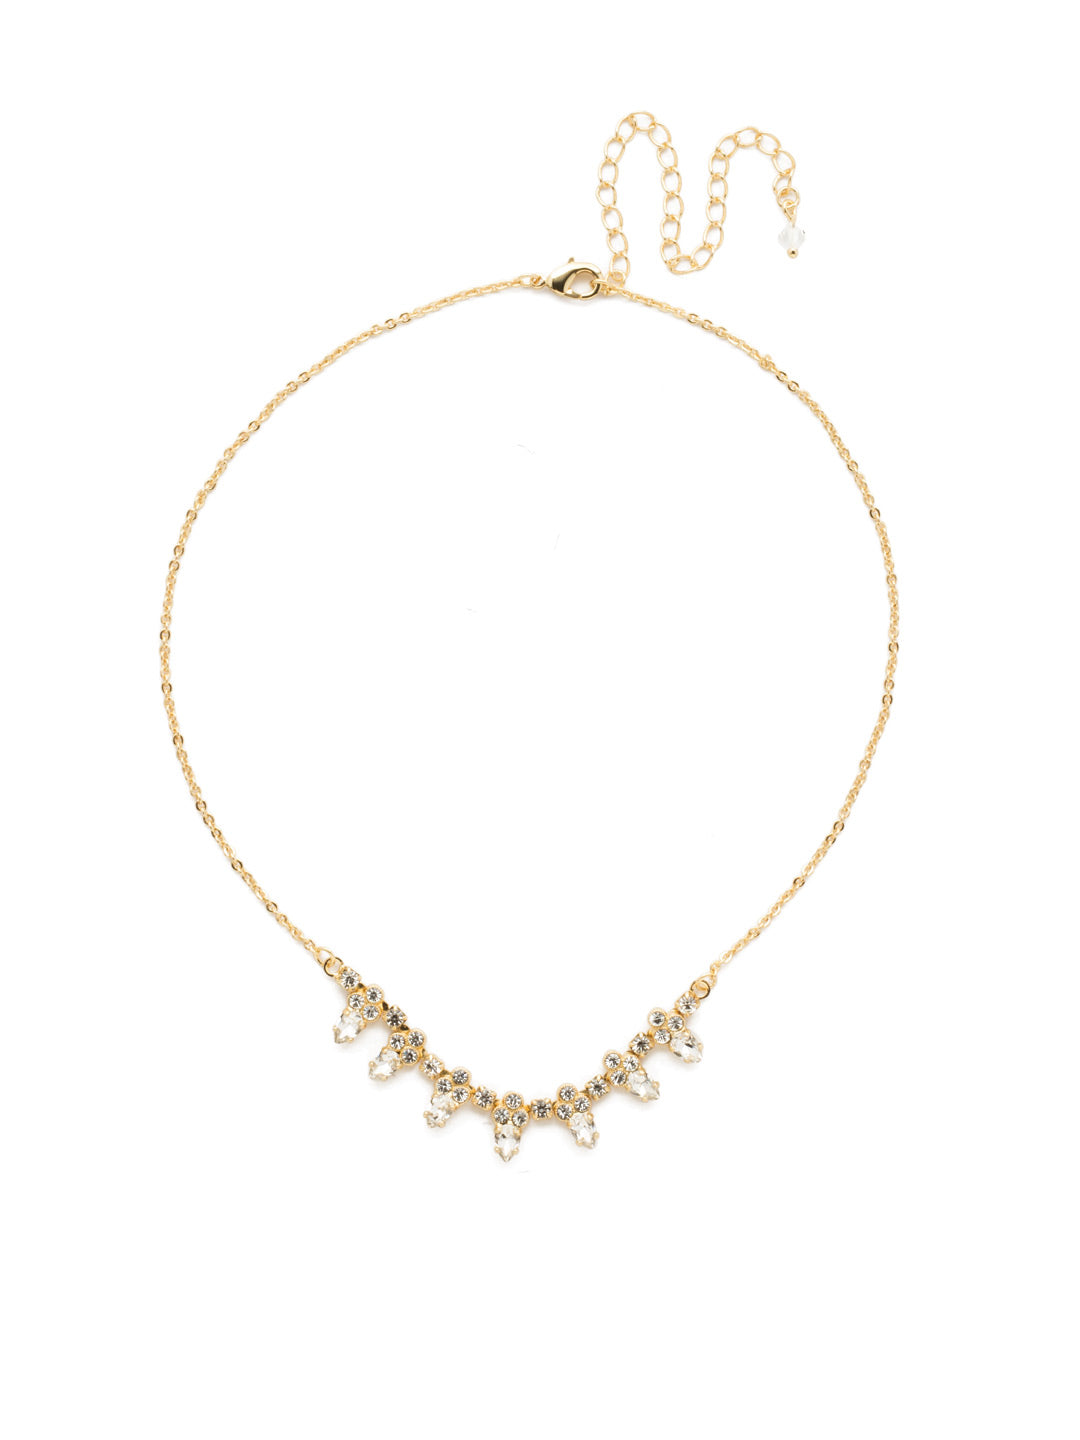 Product Image: Twinkling Thistle Tennis Necklace